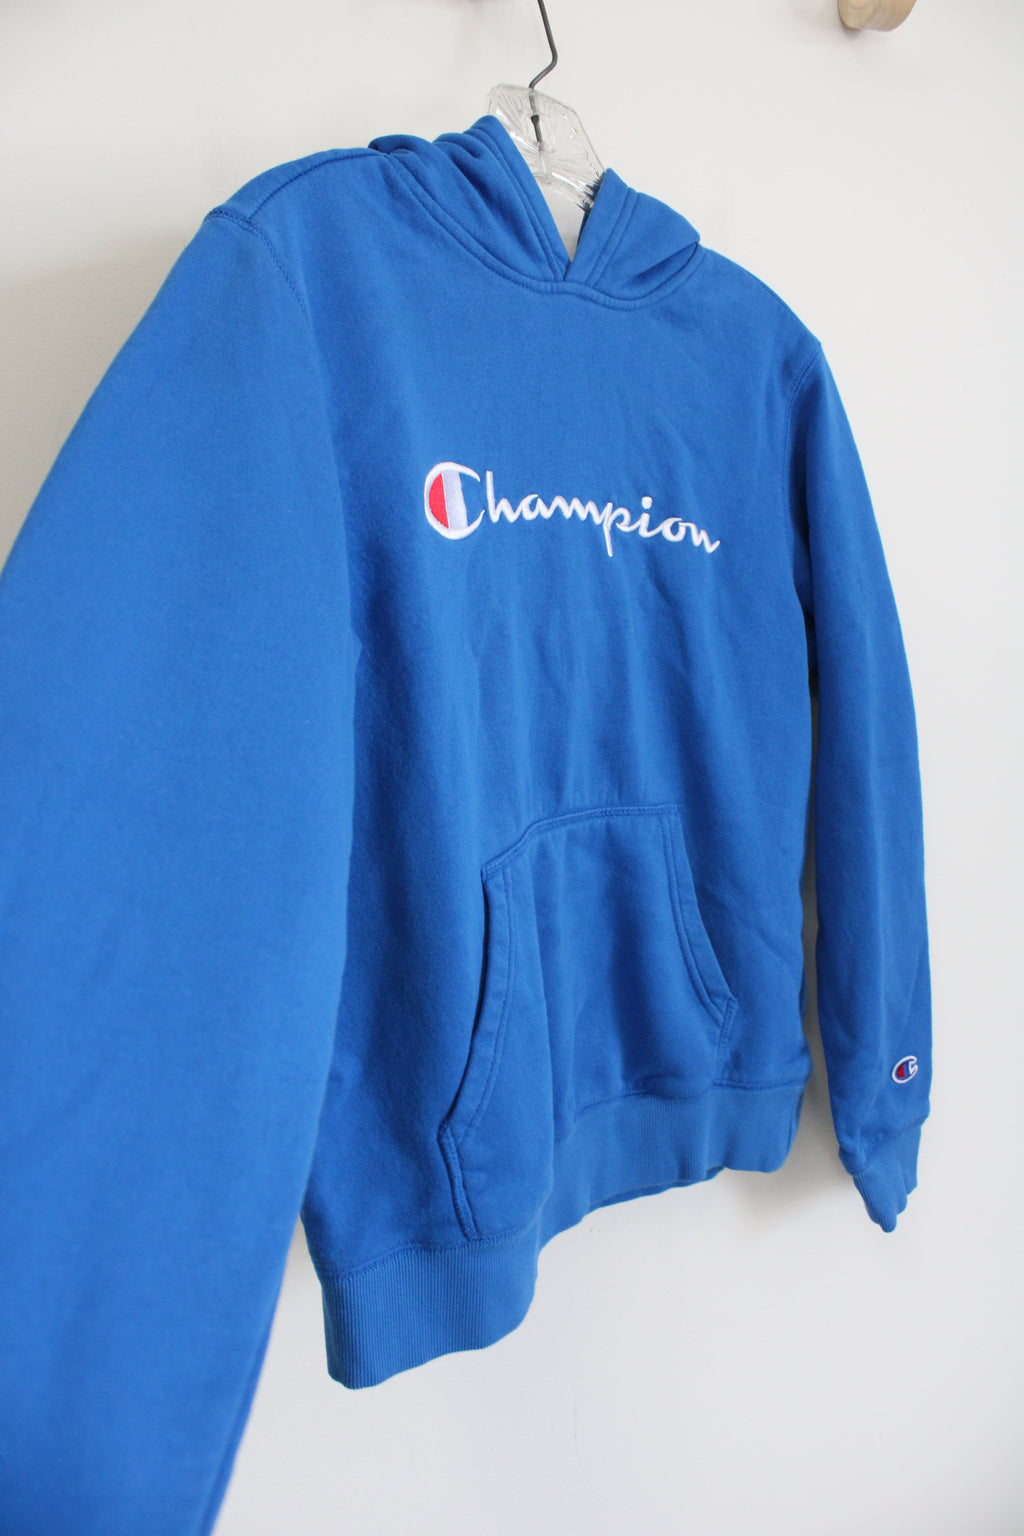 Champion Blue Embroidered hoodie | Youth L (11/12)